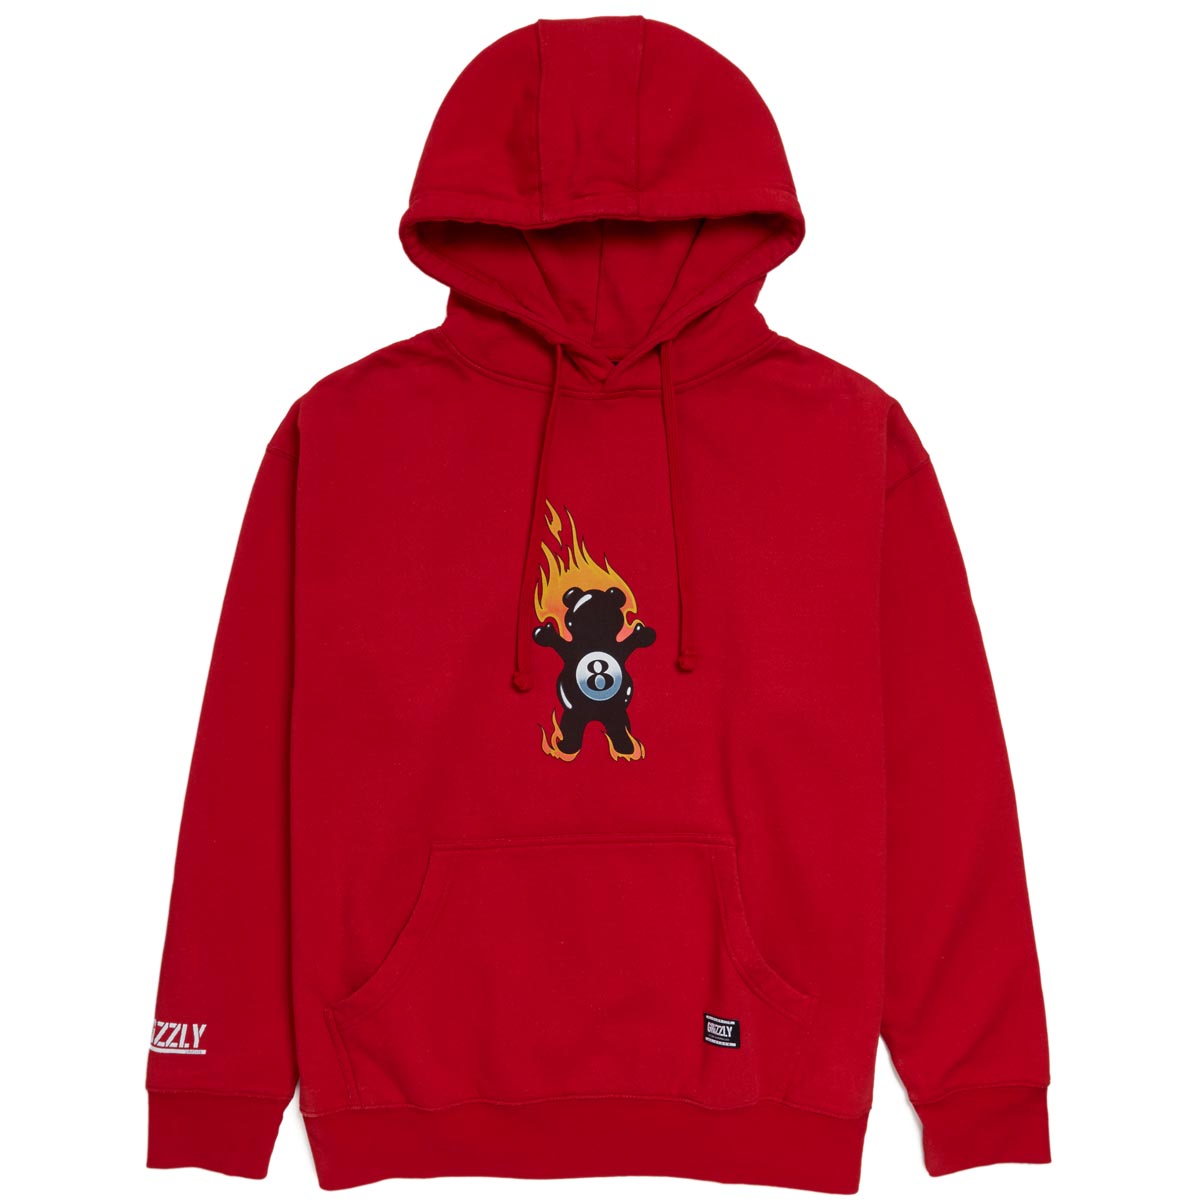 Grizzly Behind The 8Ball Hoodie - Red image 1